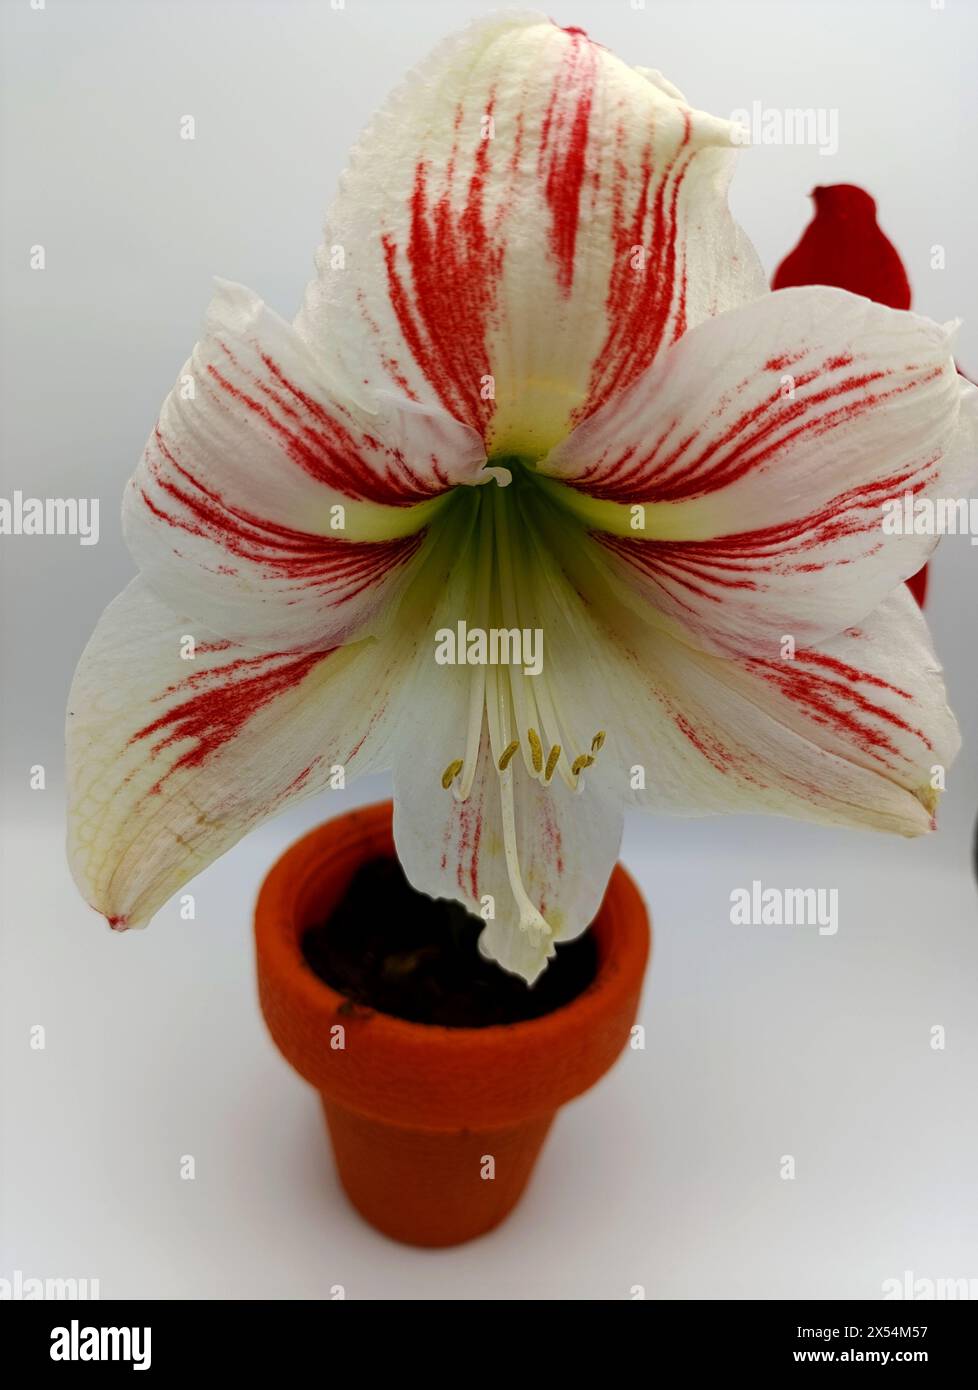 Amaryllis lily flowers white and red flowers nature beauty red and white Stock Photo